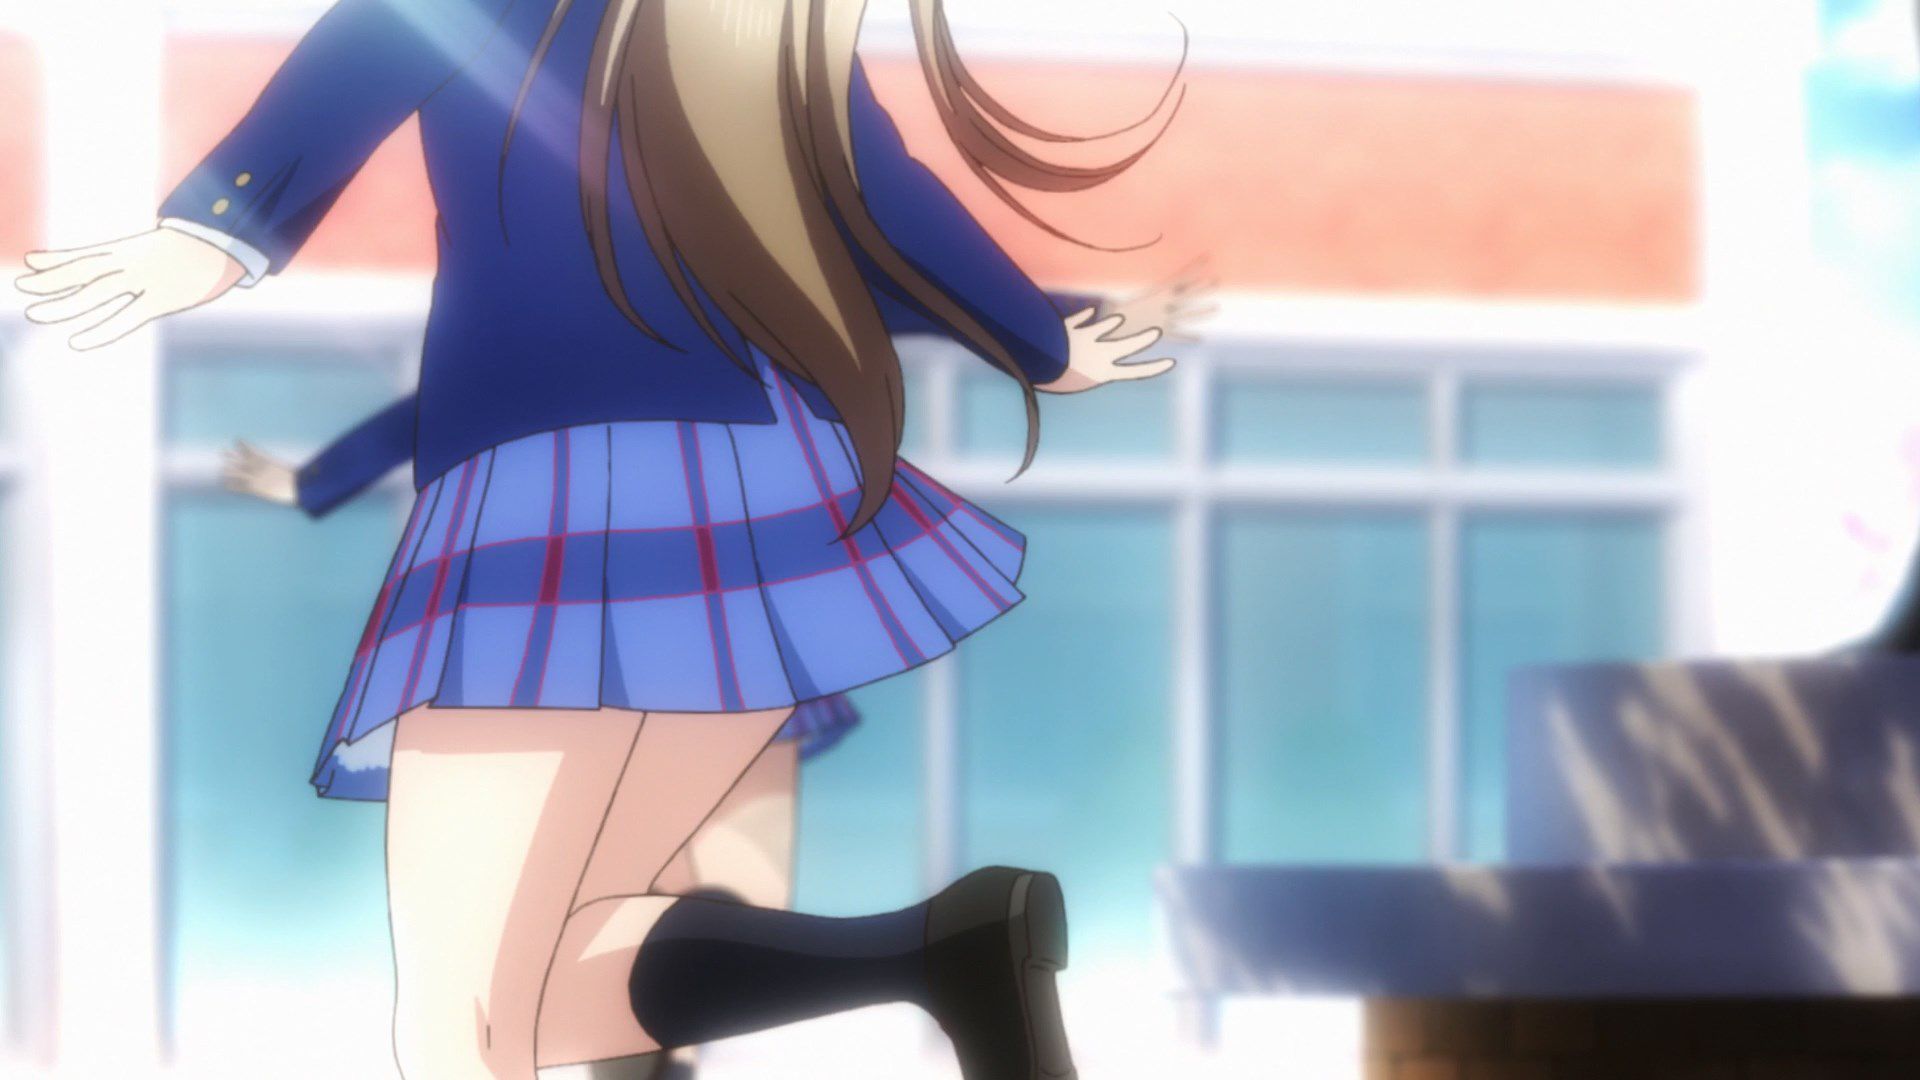 [God images] "love live! ' Μm ' PV's leg is too erotic everyone wakes up to a leg fetish of wwwww 92